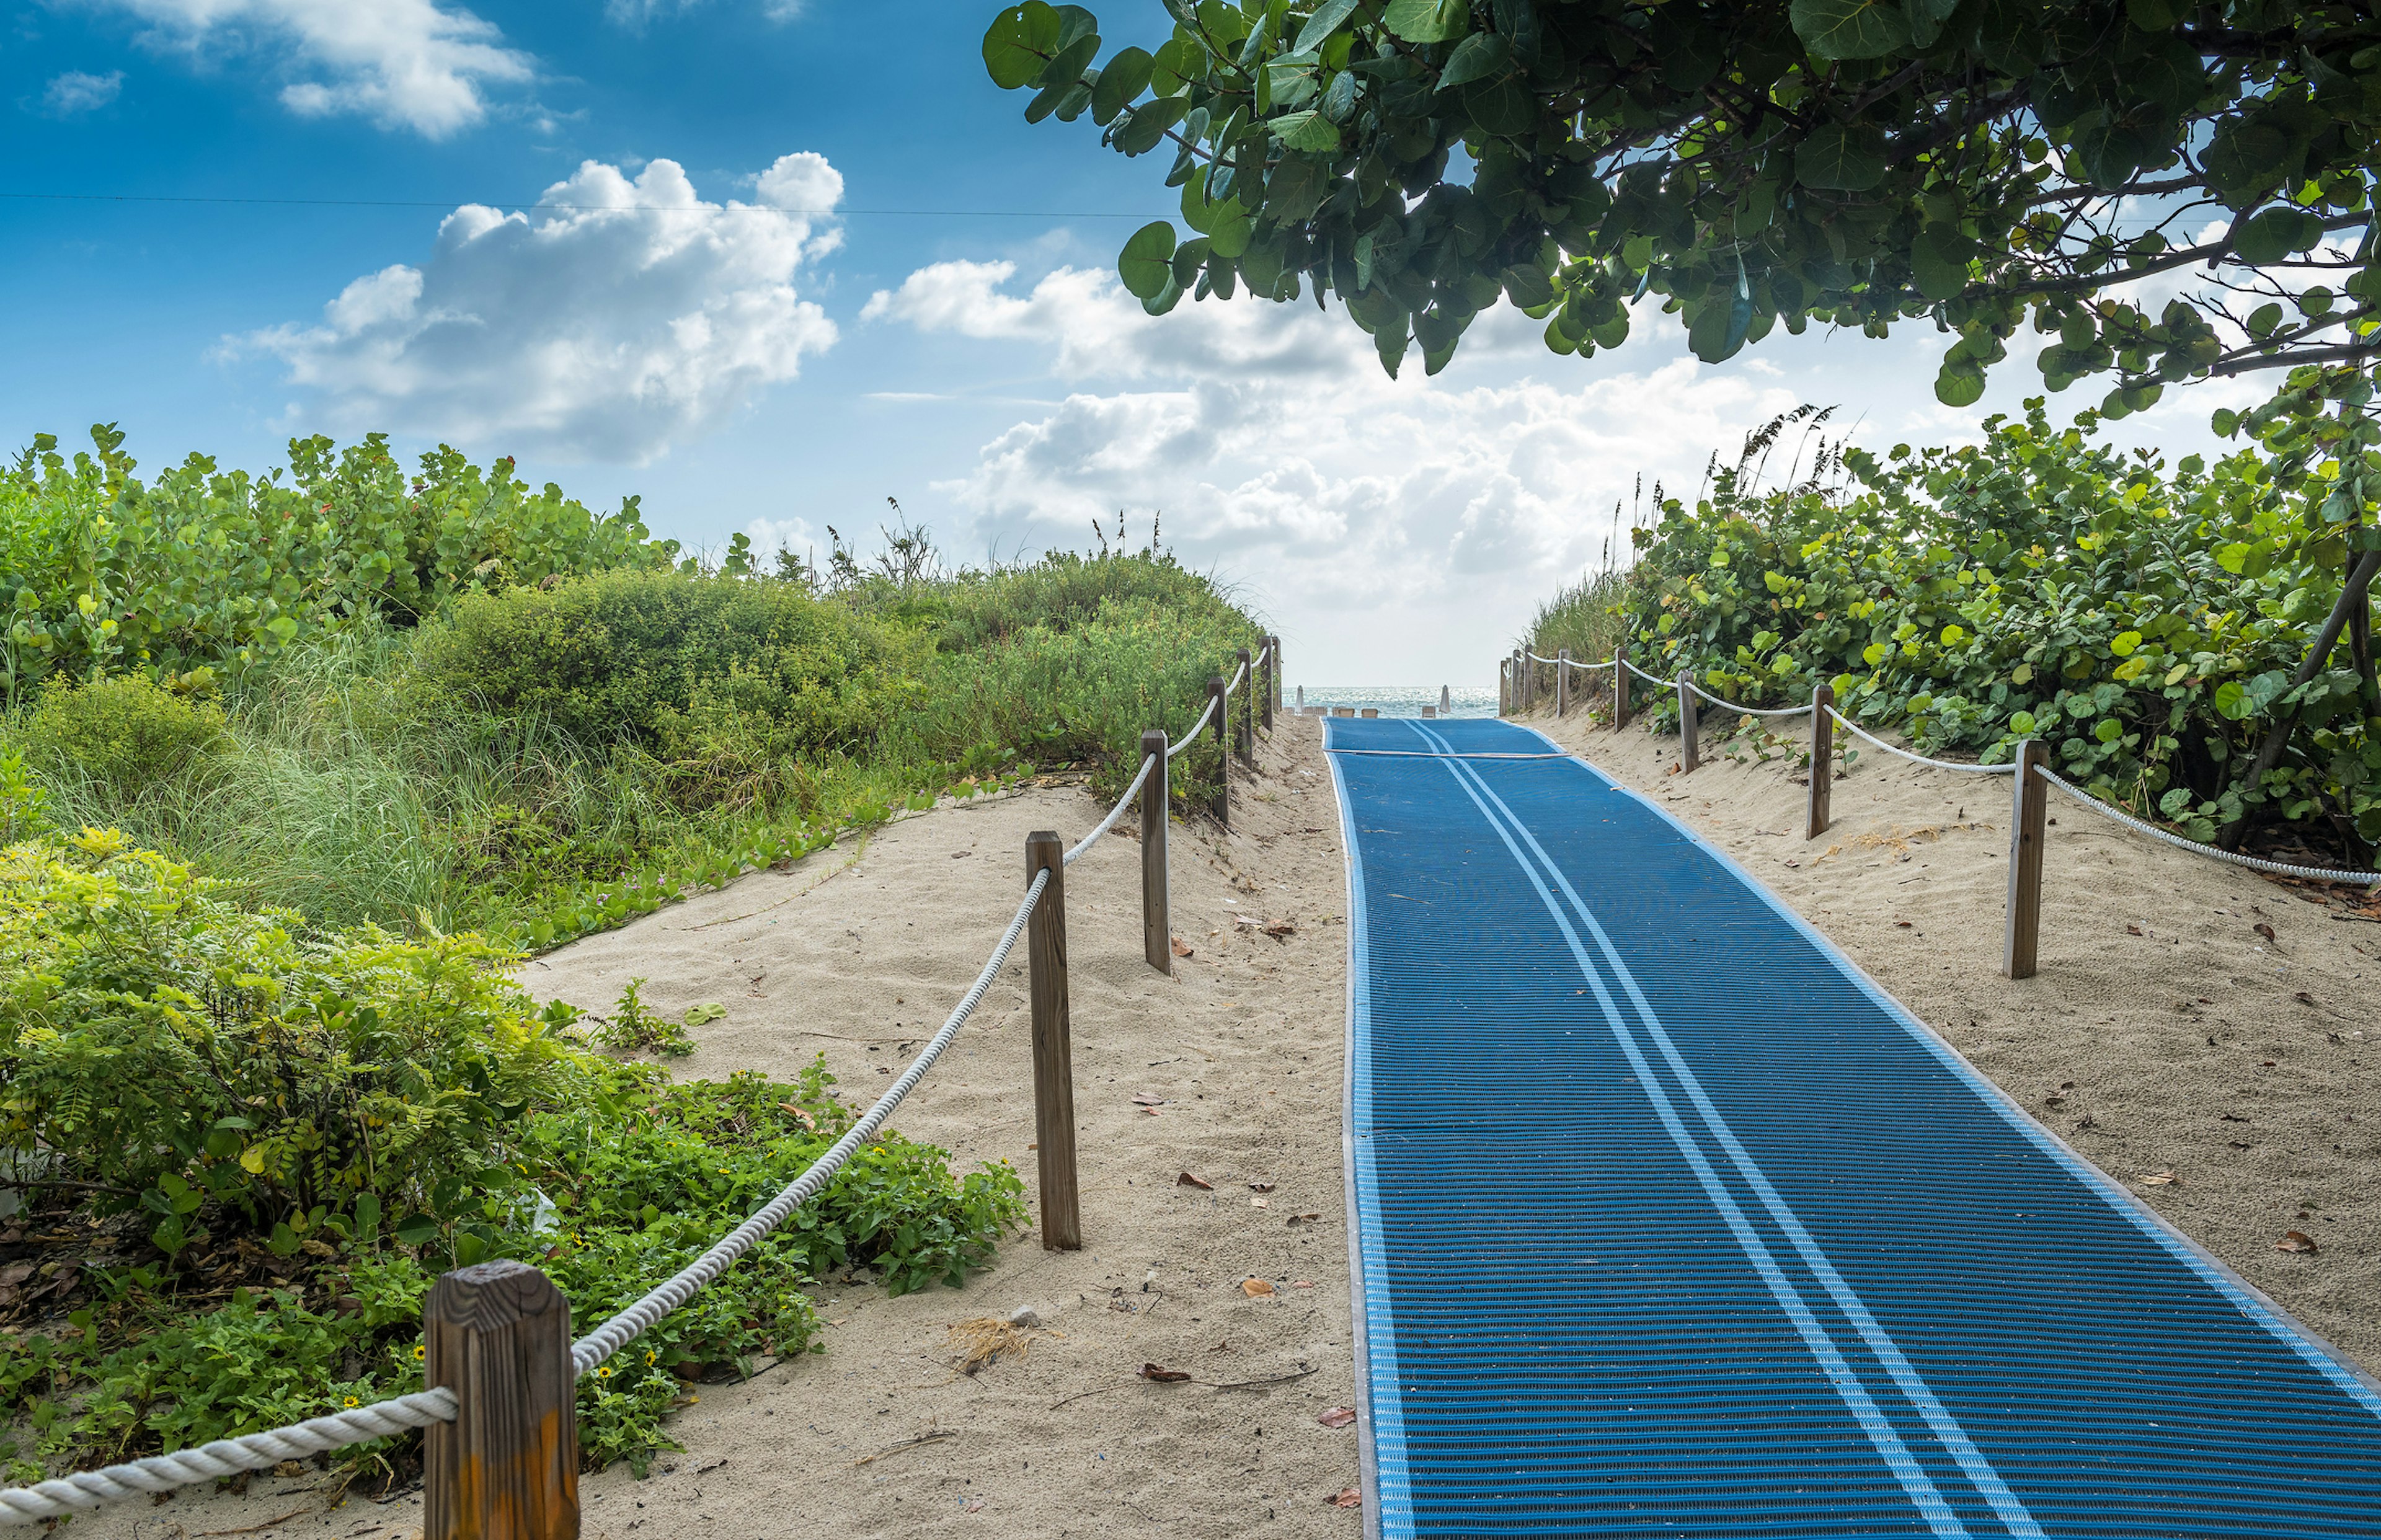 Blue pathway helping people with physical impairment going thru the beach sand.